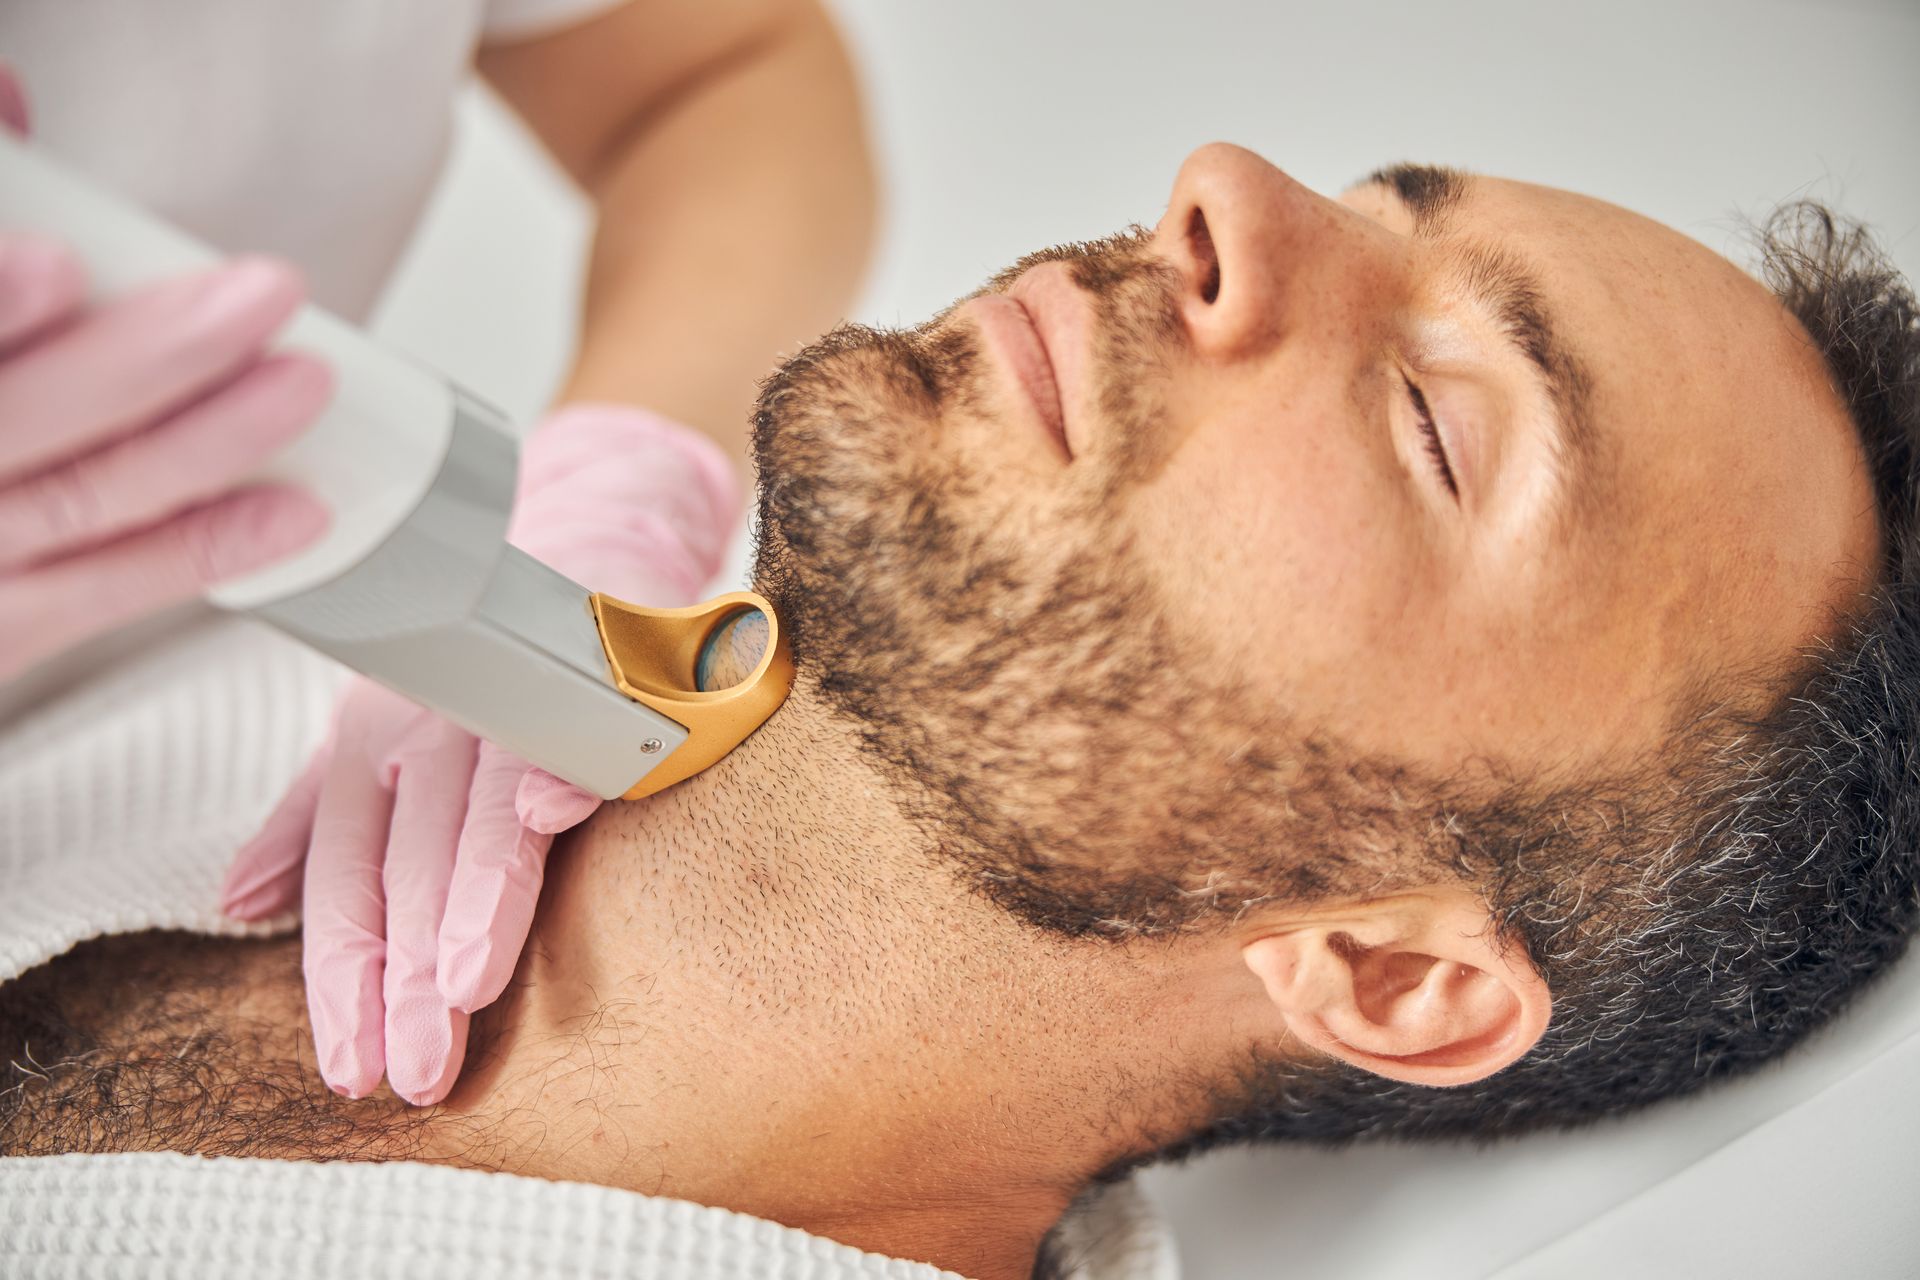 a man is getting a hair removal treatment on his neck